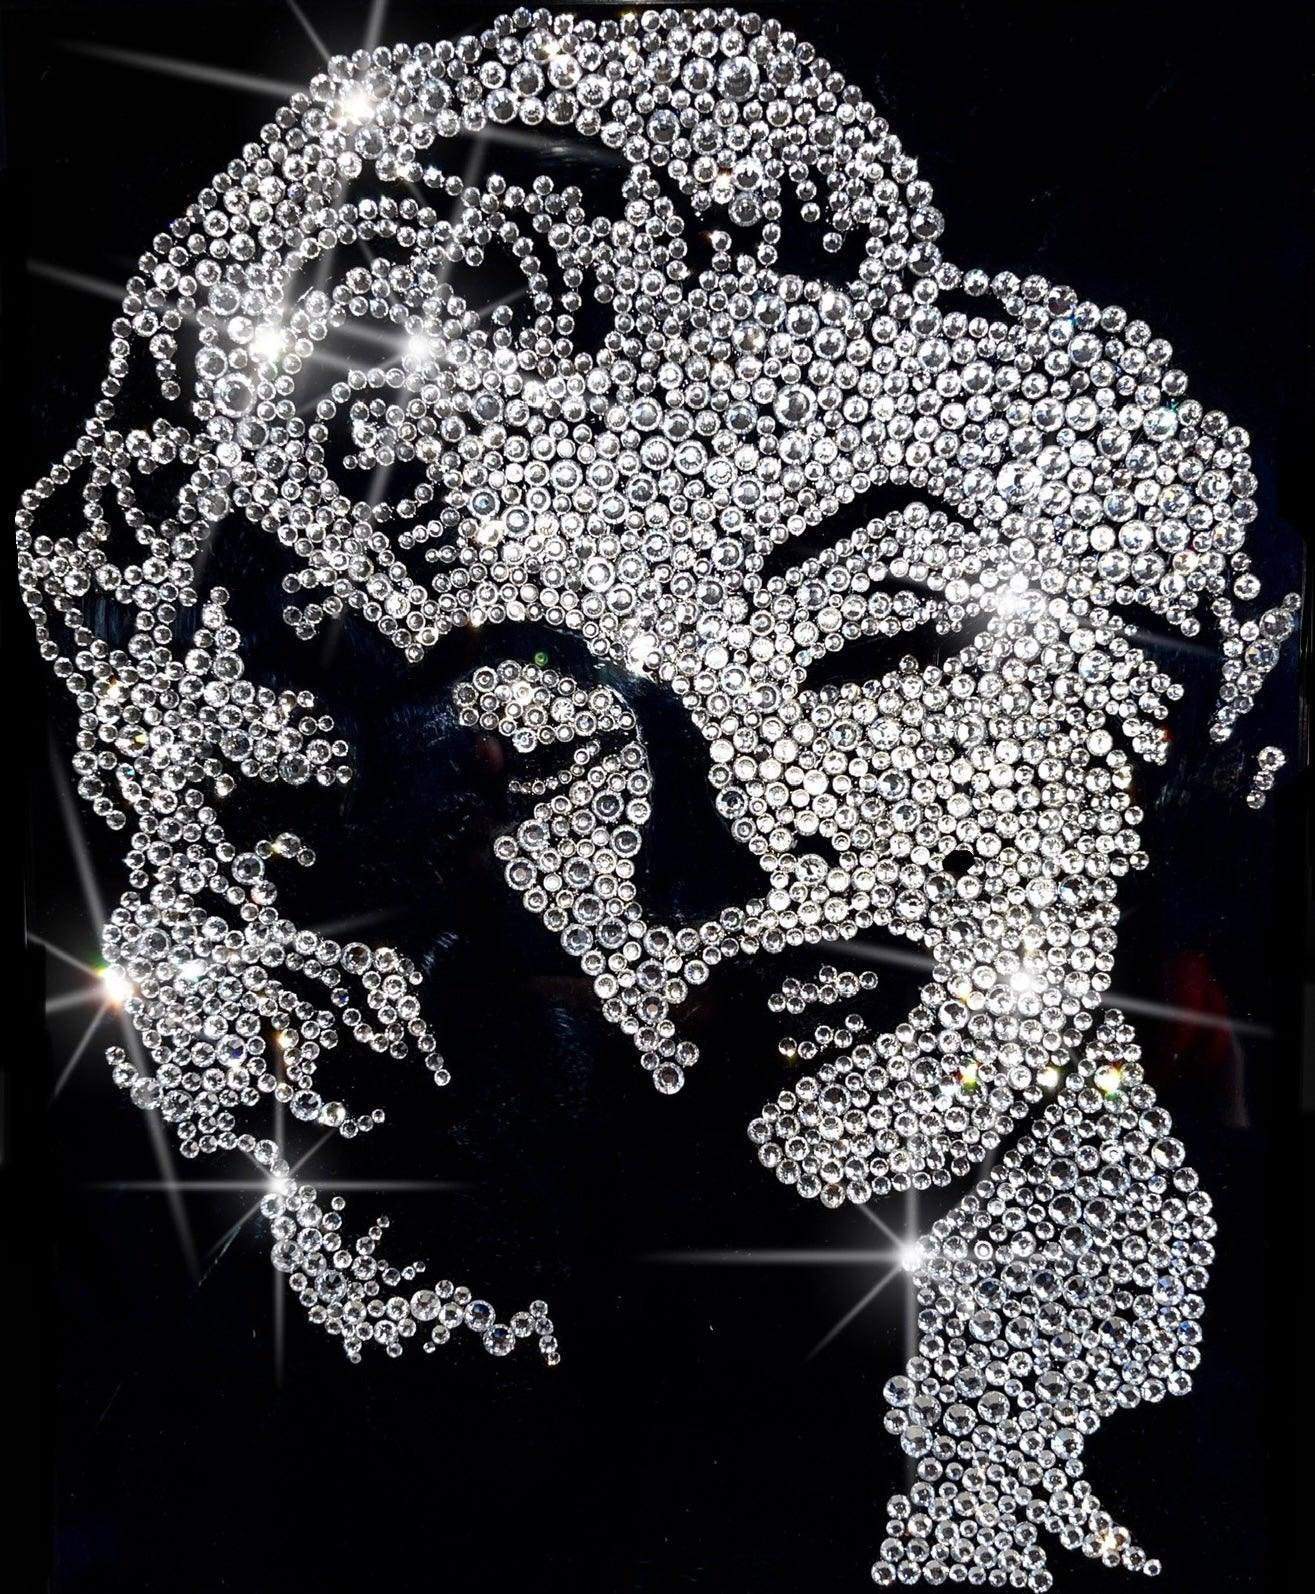 3d Crystal Portrait Of Marilyn Monroe With Shine Sparky Swarovski Crystals Best Wall Art 9438